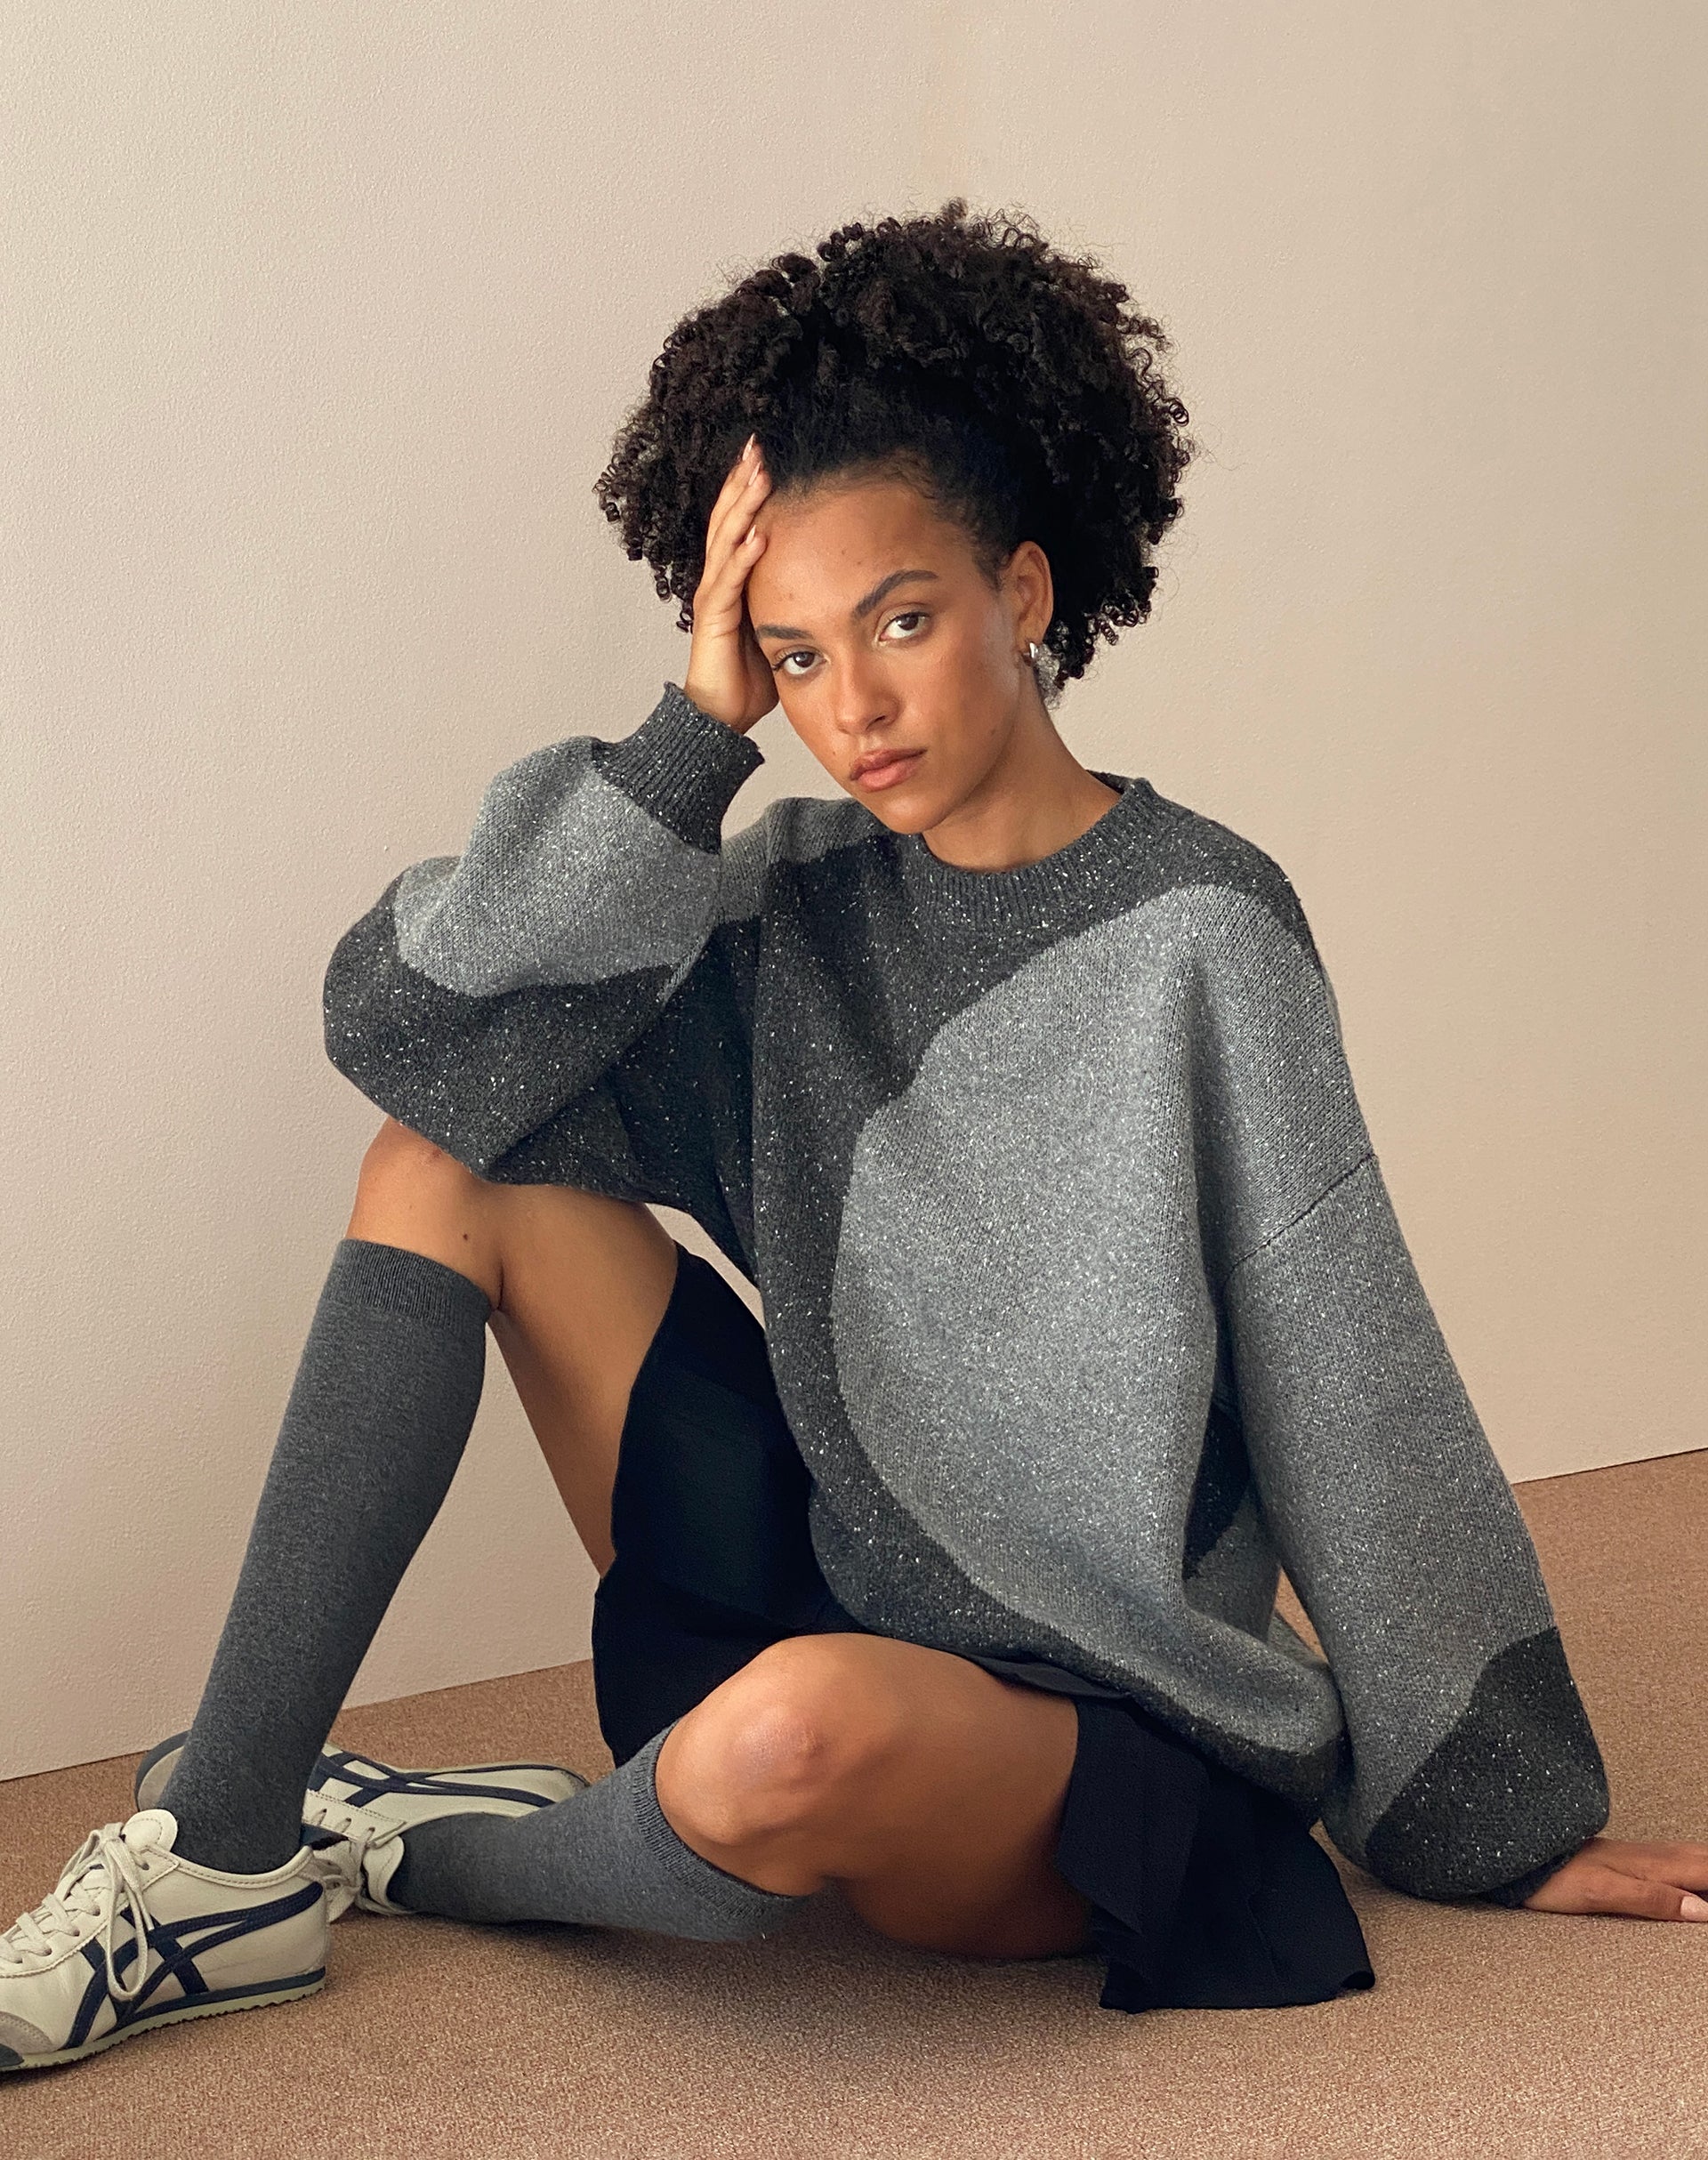 Image of Namari Jumper in Black and Charcoal Mix Knit